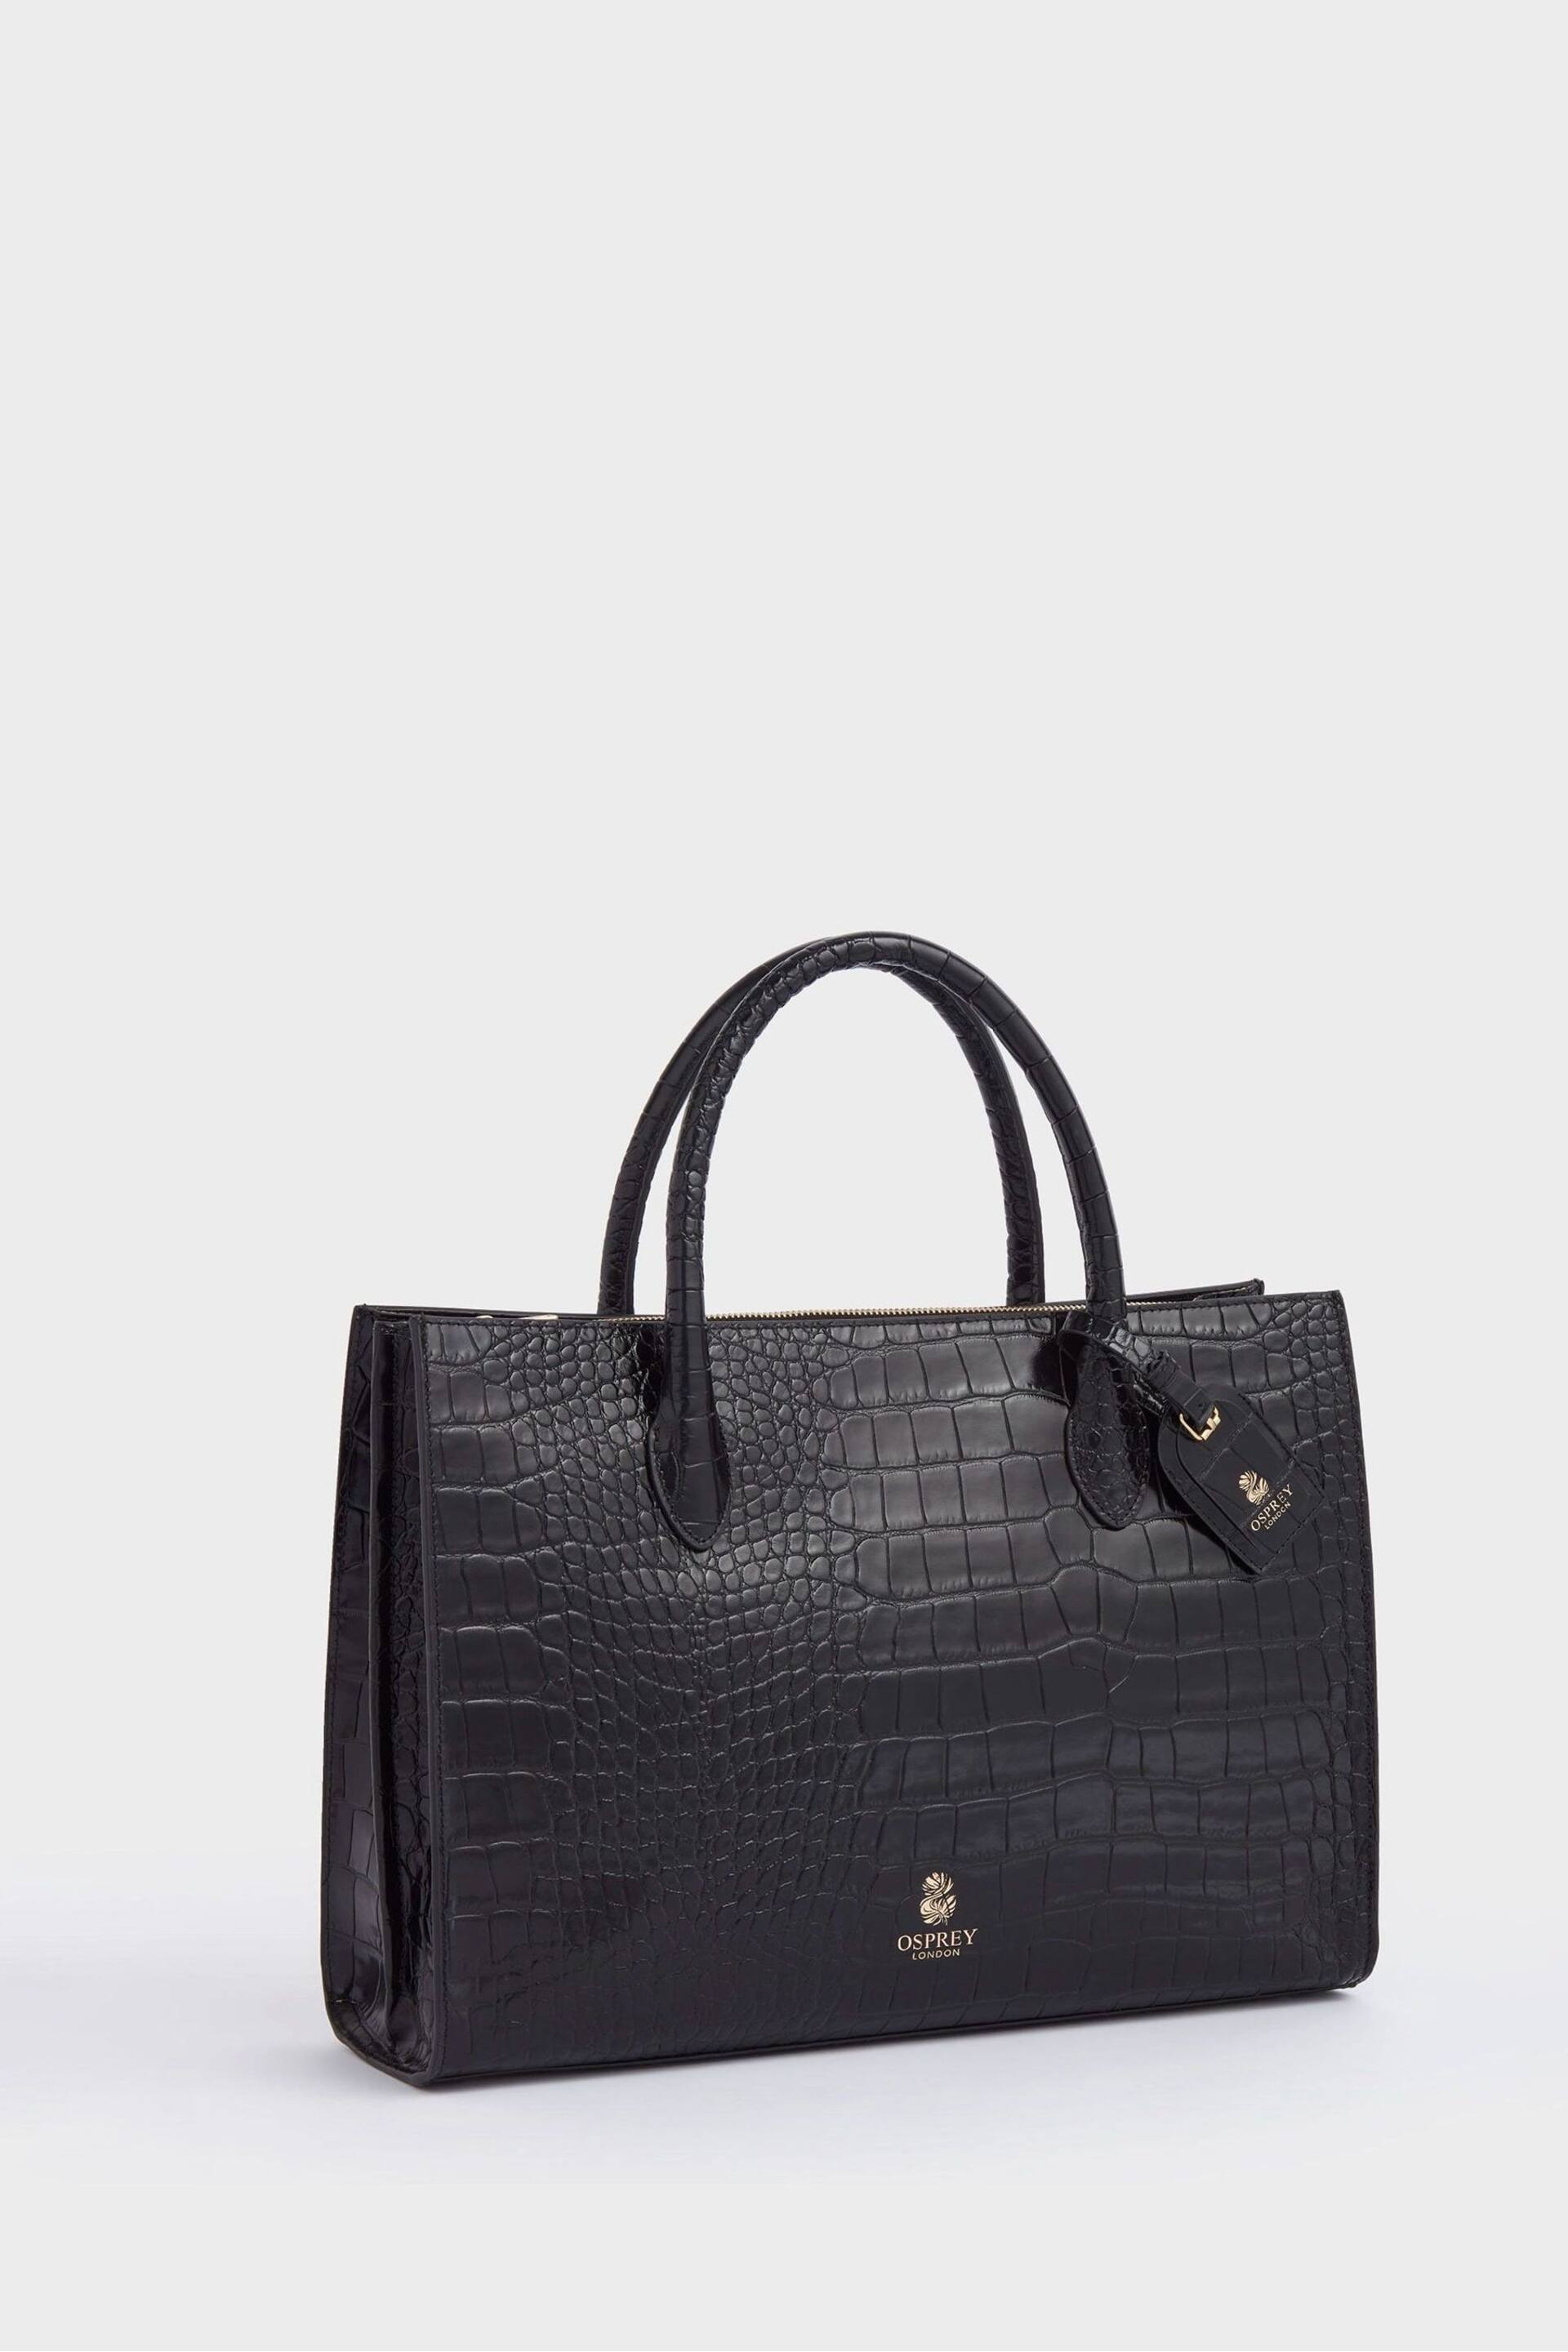 OSPREY LONDON Wentworth Italian Leather Tote - Image 3 of 6